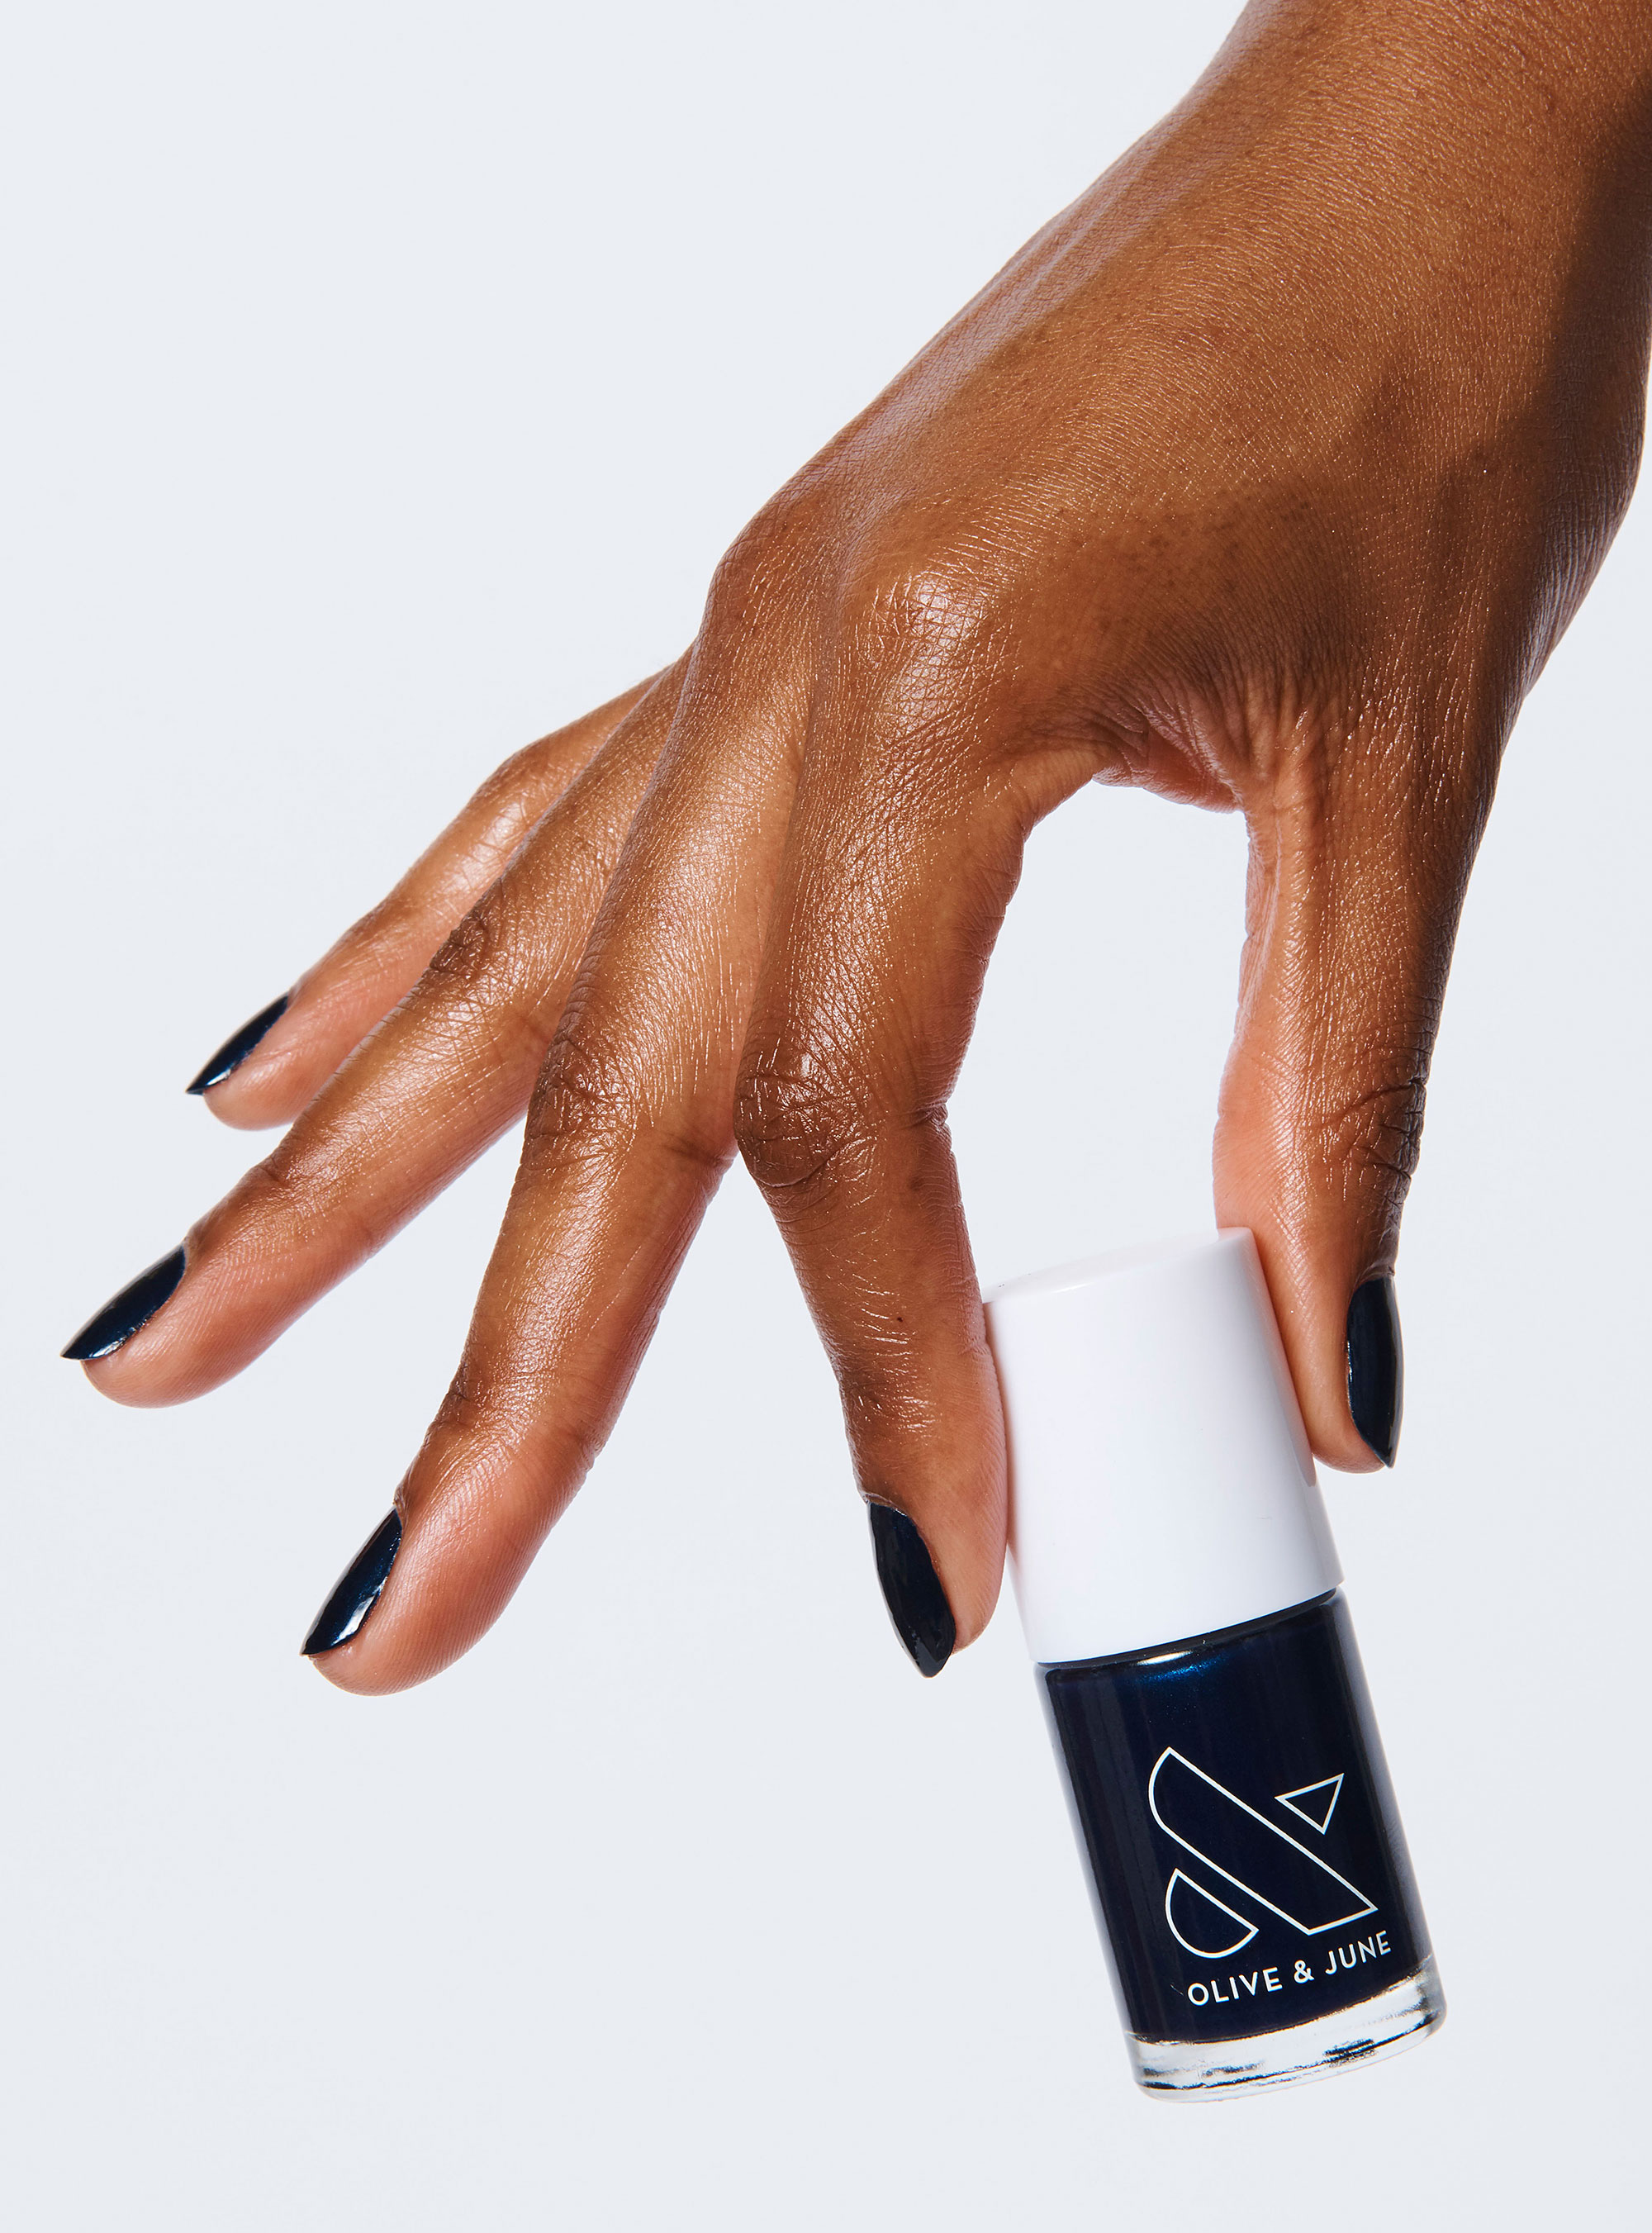 Get Tressed With Us' Podcast: Olive & June Founder on Nail Art